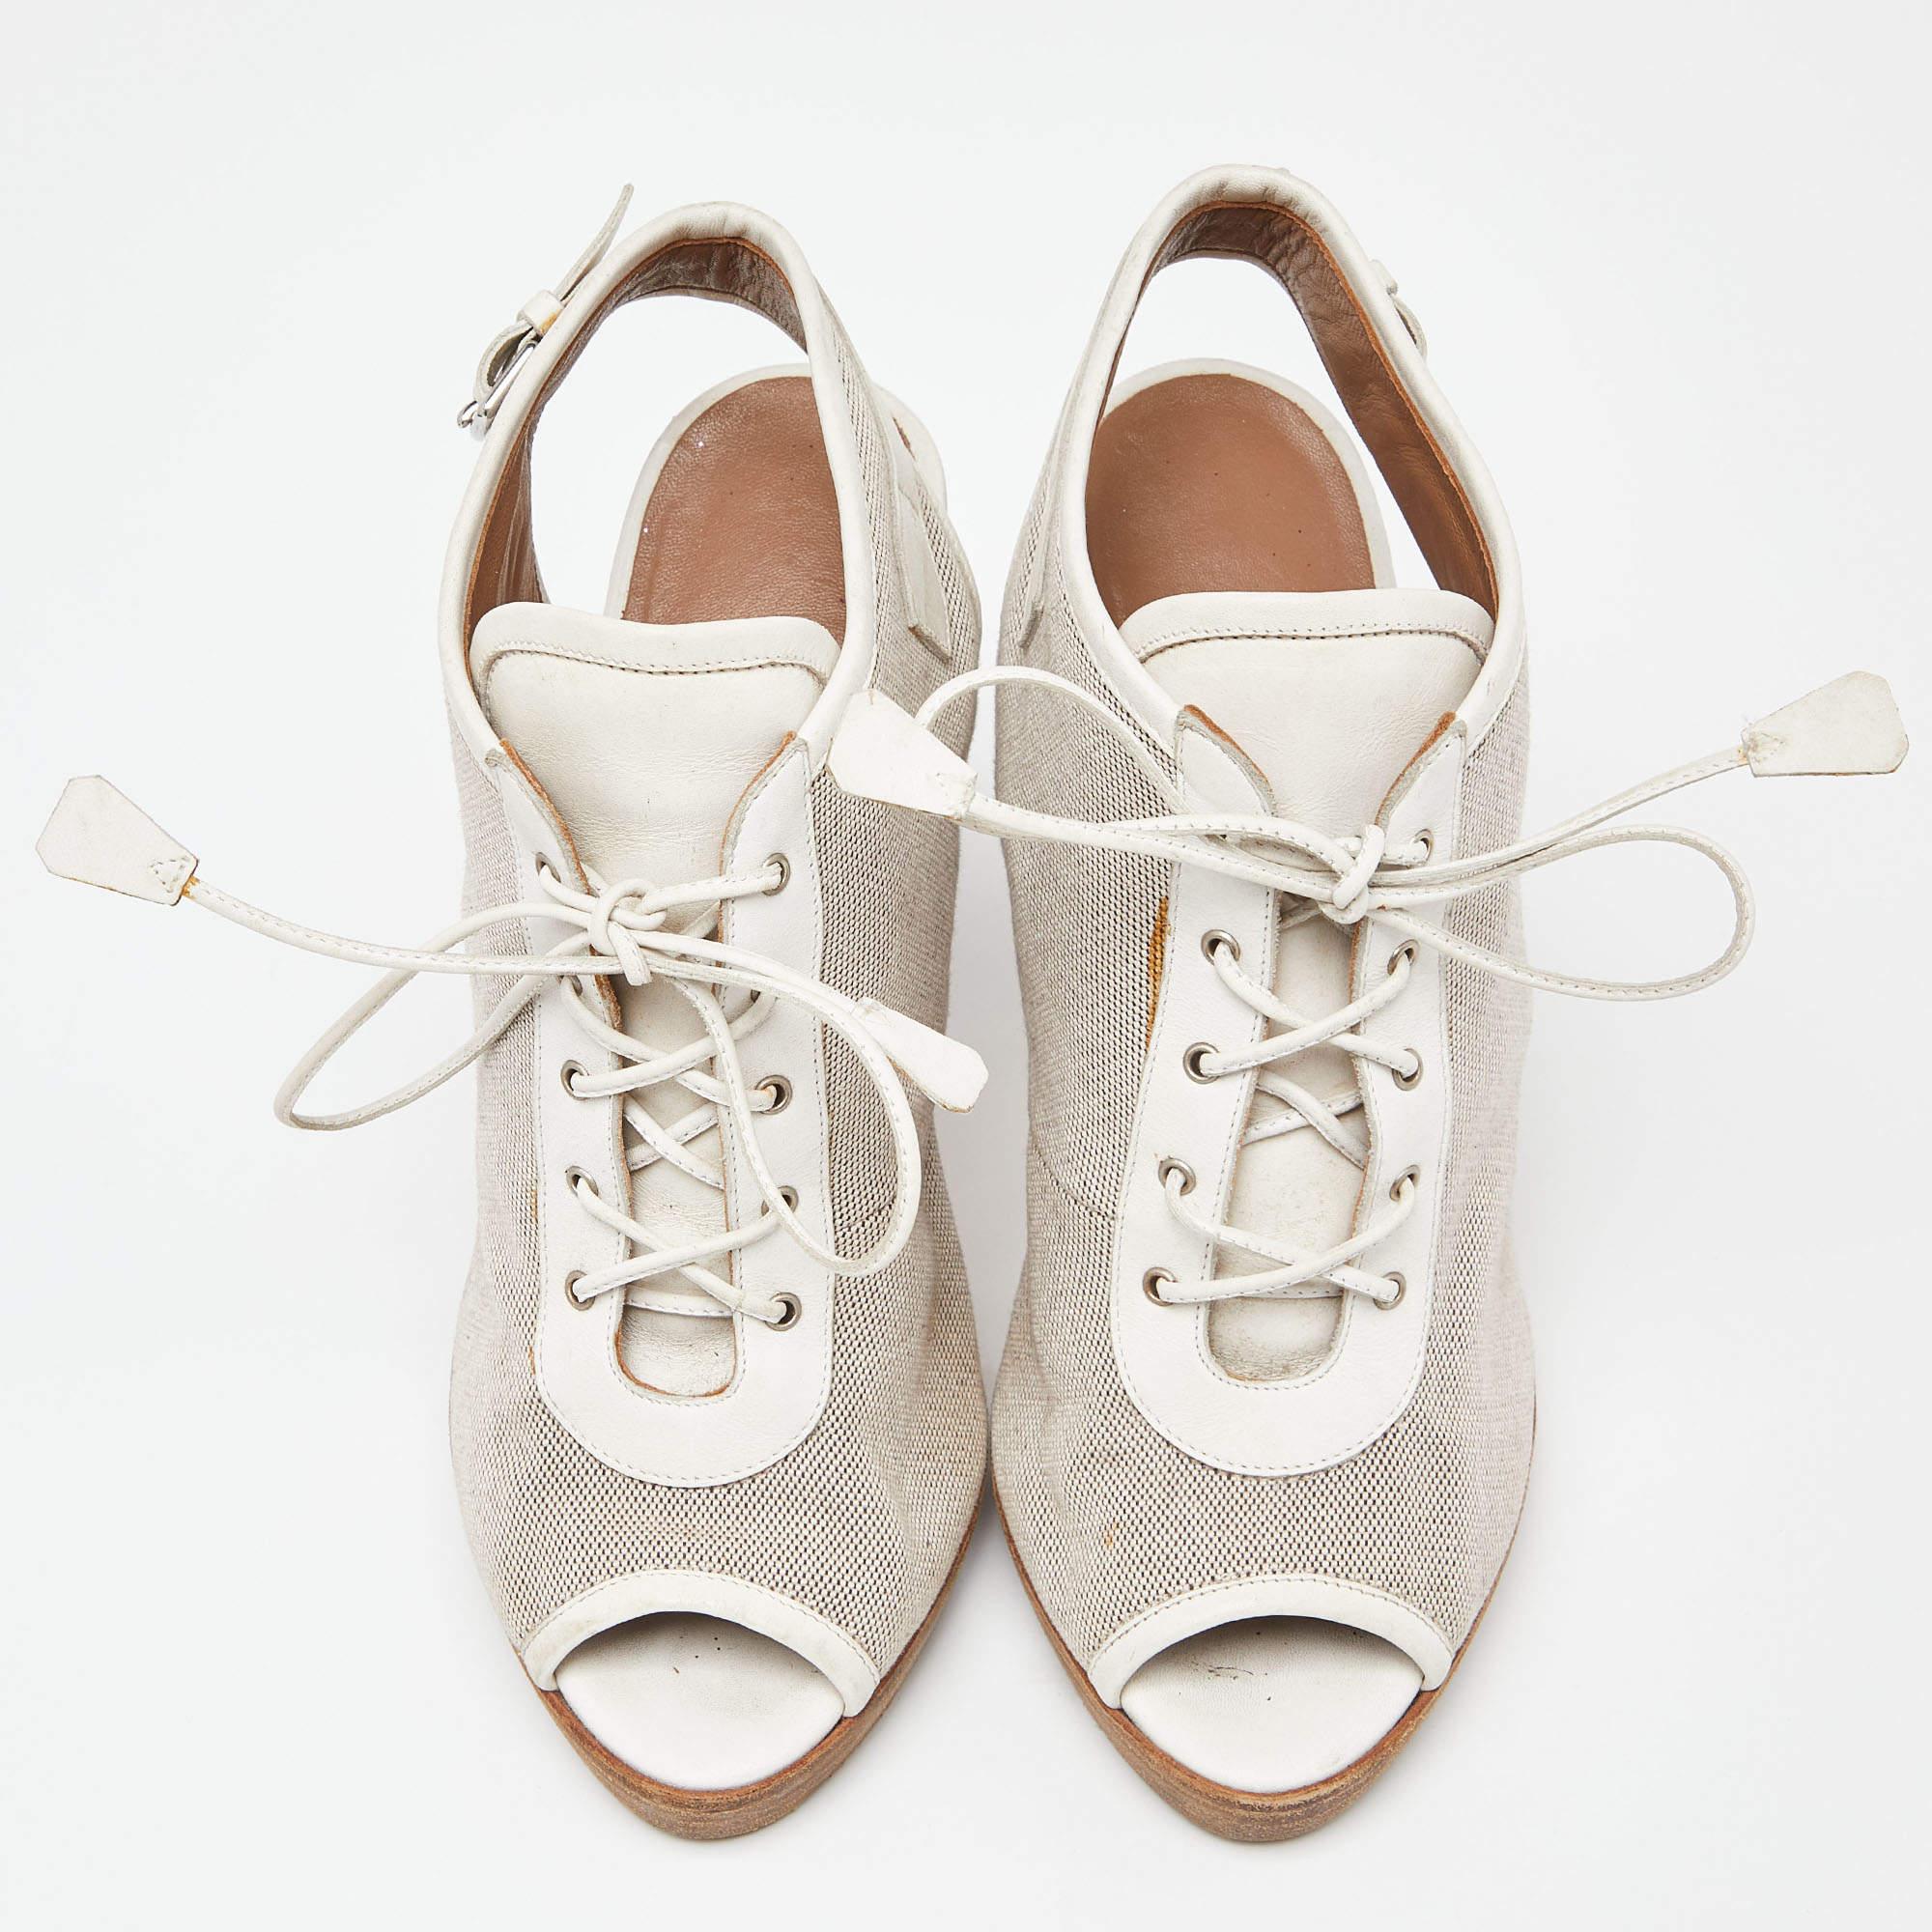 Hermes Grey/White Canvas and Leather Peep Toe Lace Up Slingback Booties Size 39 In Good Condition For Sale In Dubai, Al Qouz 2